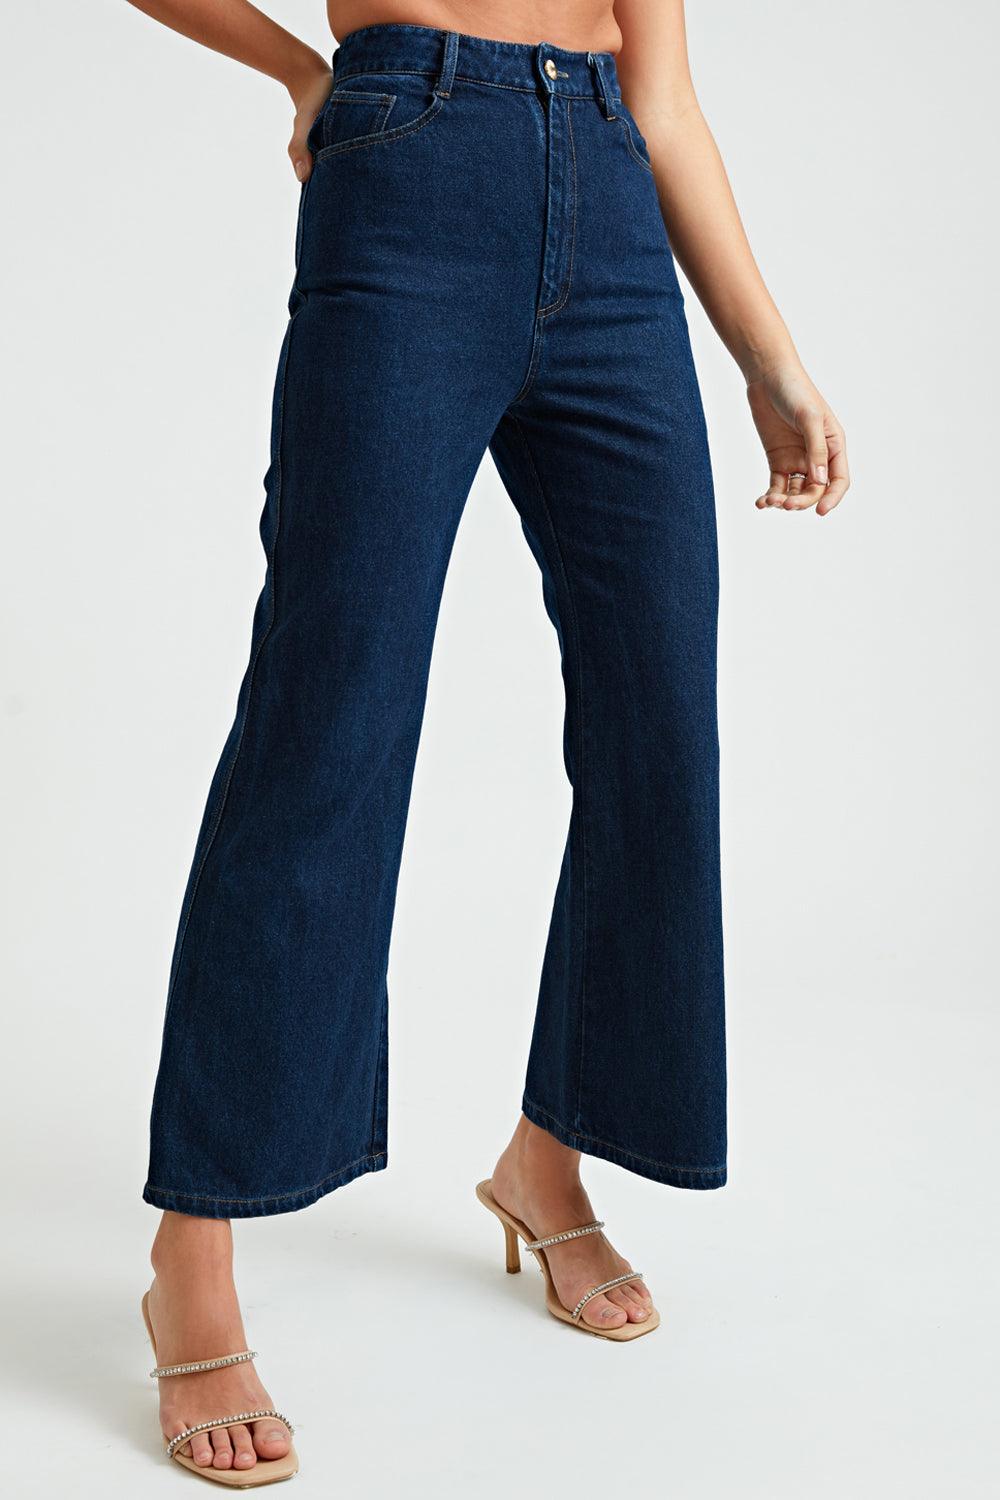 Denim Cut Out Co-ord Trousers - ANI CLOTHING